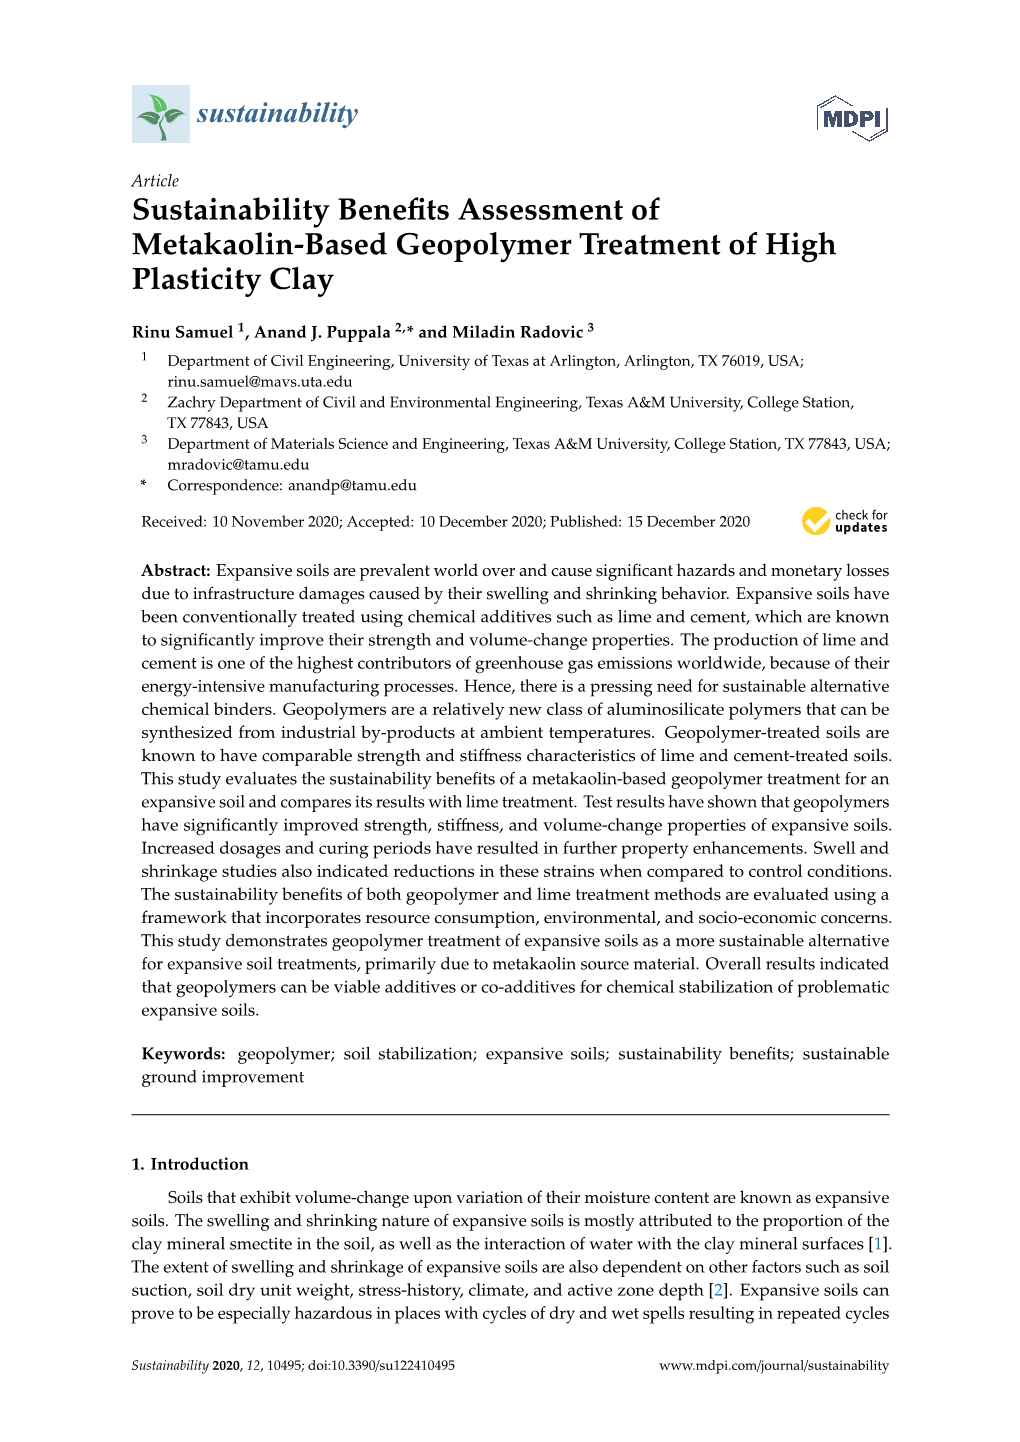 Sustainability Benefits Assessment of Metakaolin-Based Geopolymer